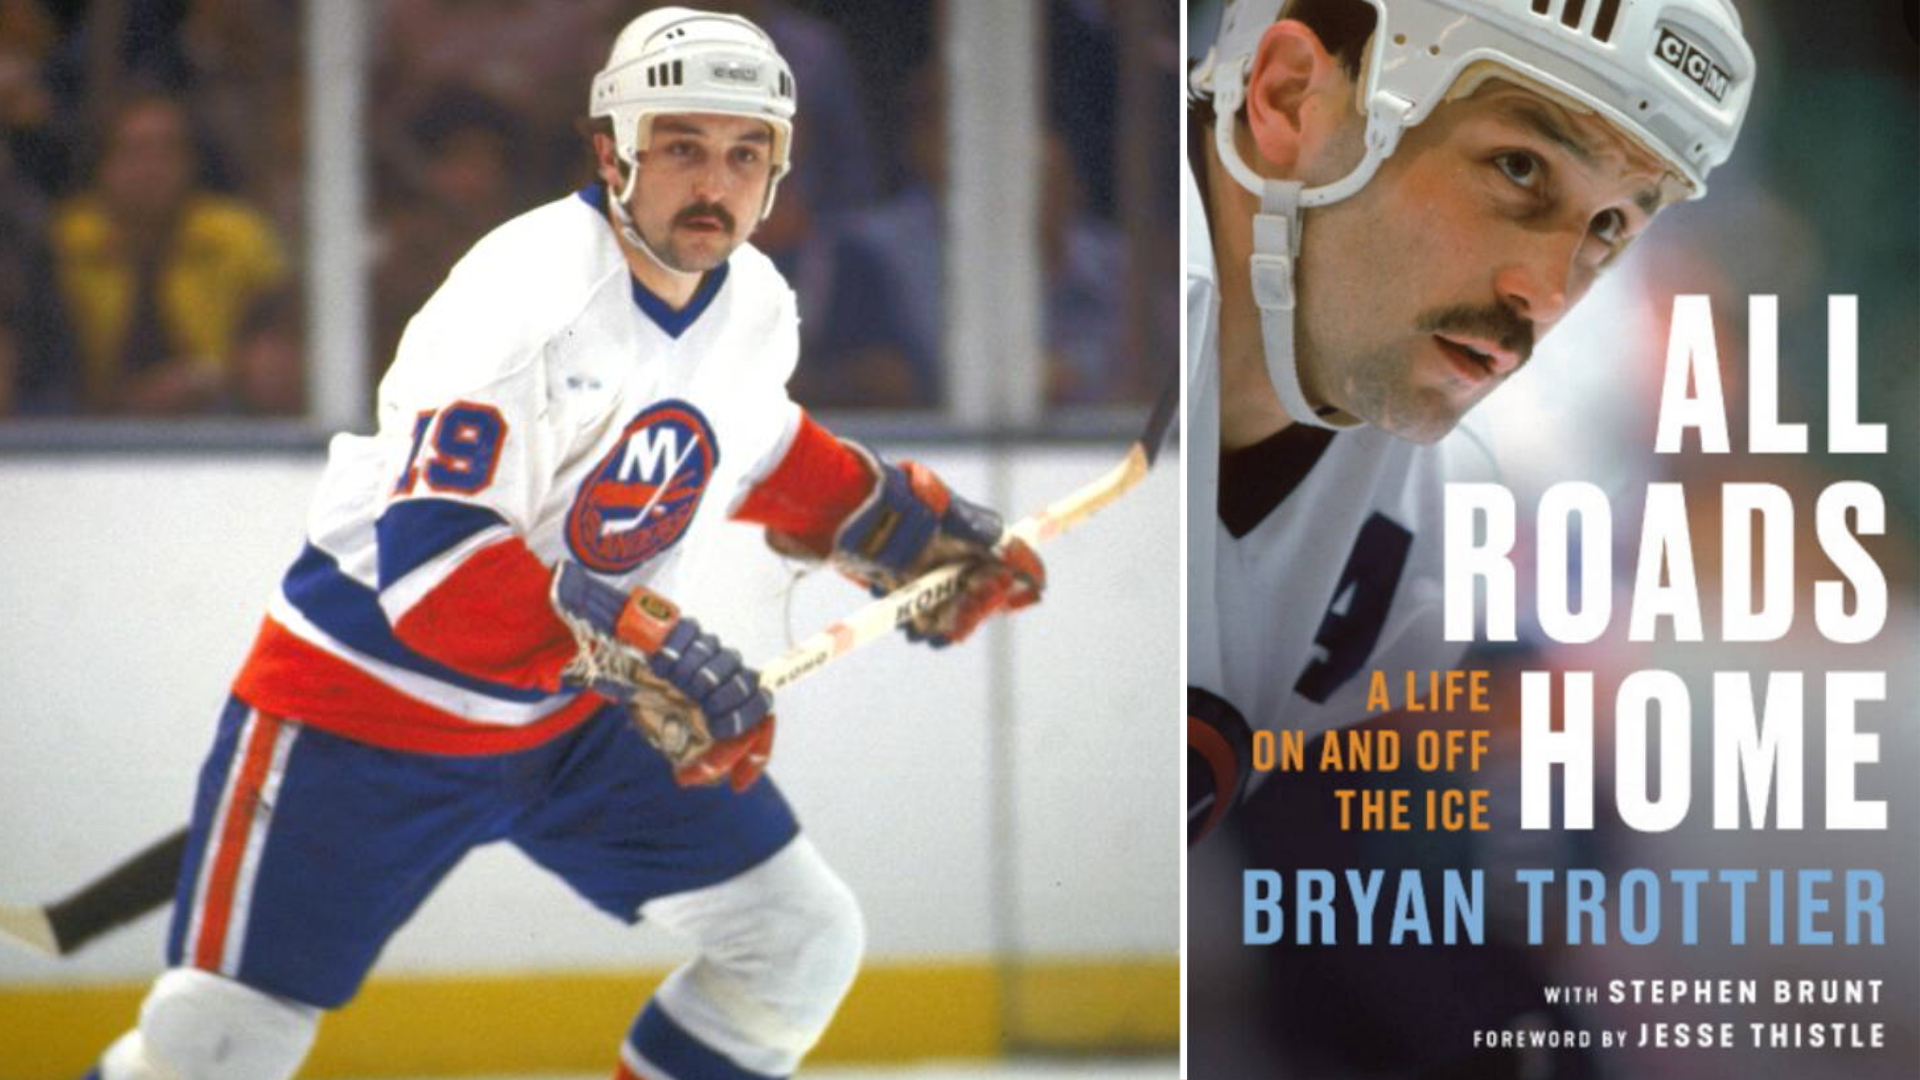 Bryan Trottier reflects on his journey from small-town Saskatchewan boy to  7-time NHL champion